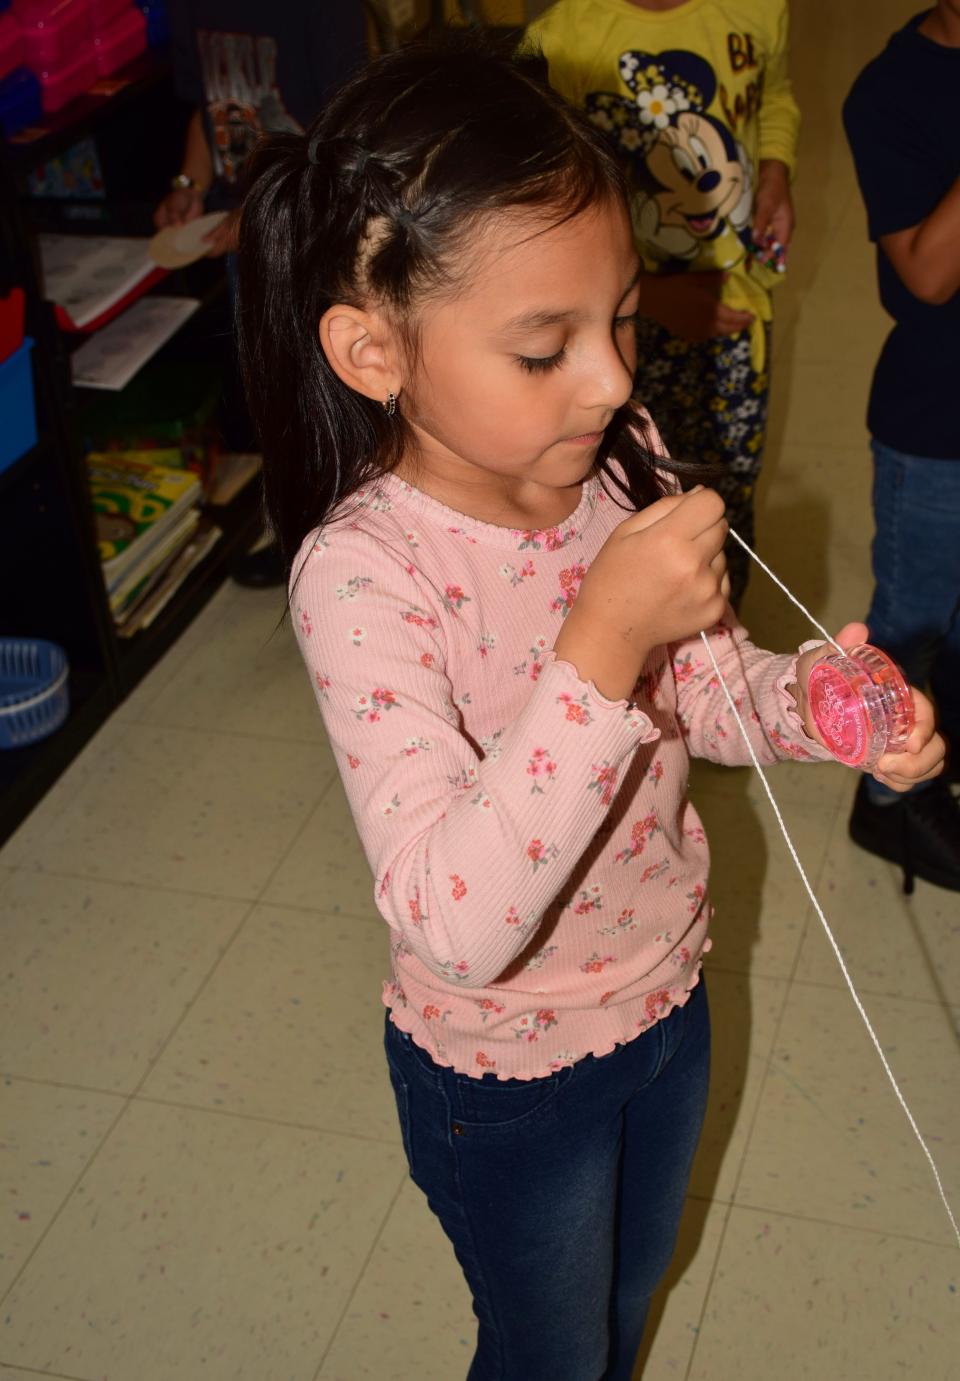 Leah, a student at Inter-Faith Community Preschool, winds up a yo-yo at the north Fort Smith preschool that will close May 17 after 56 years.